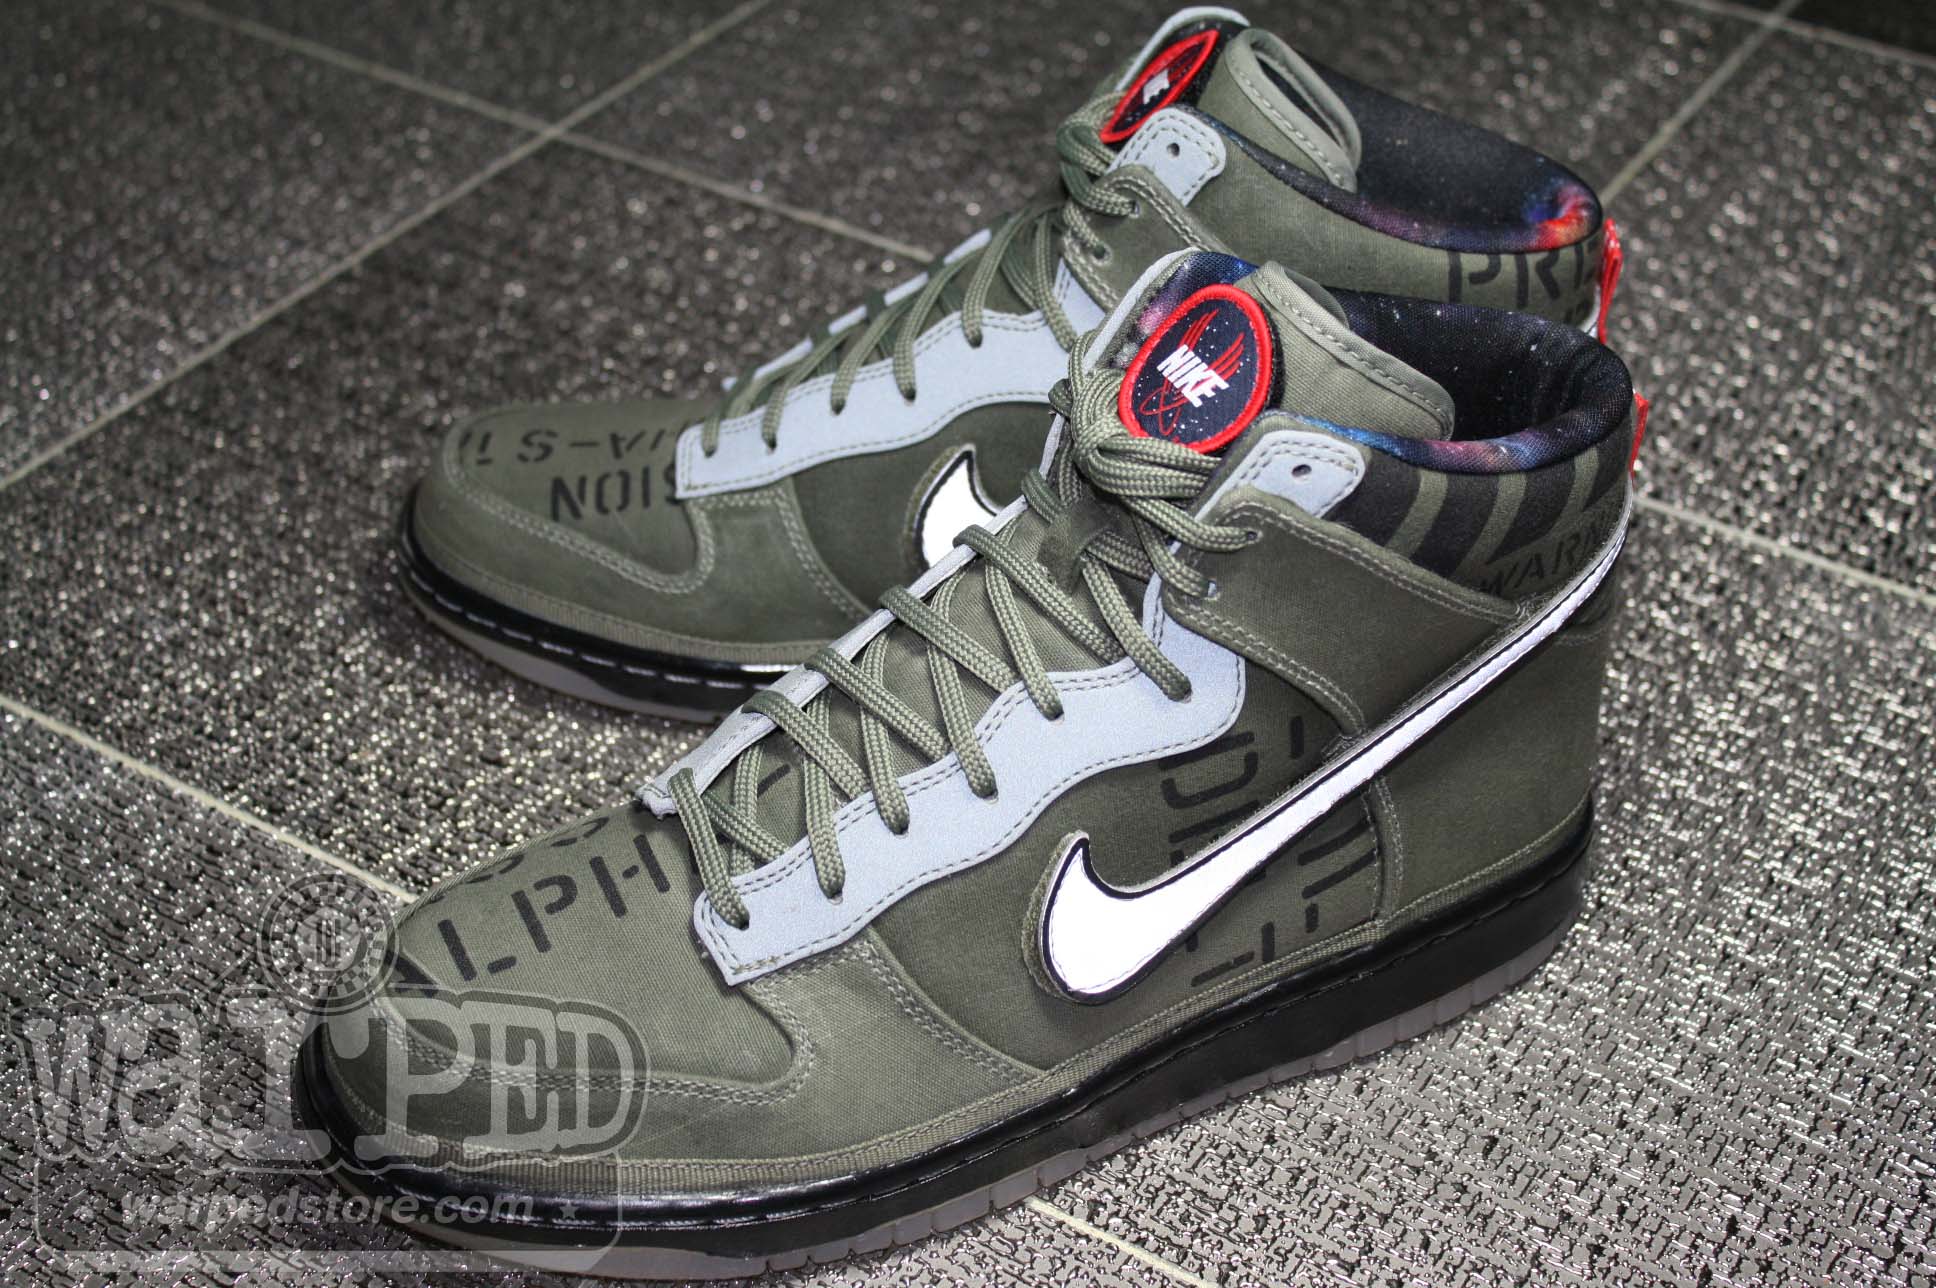 Nike Dunk High Premium 2012 NBA ASG - Another Look